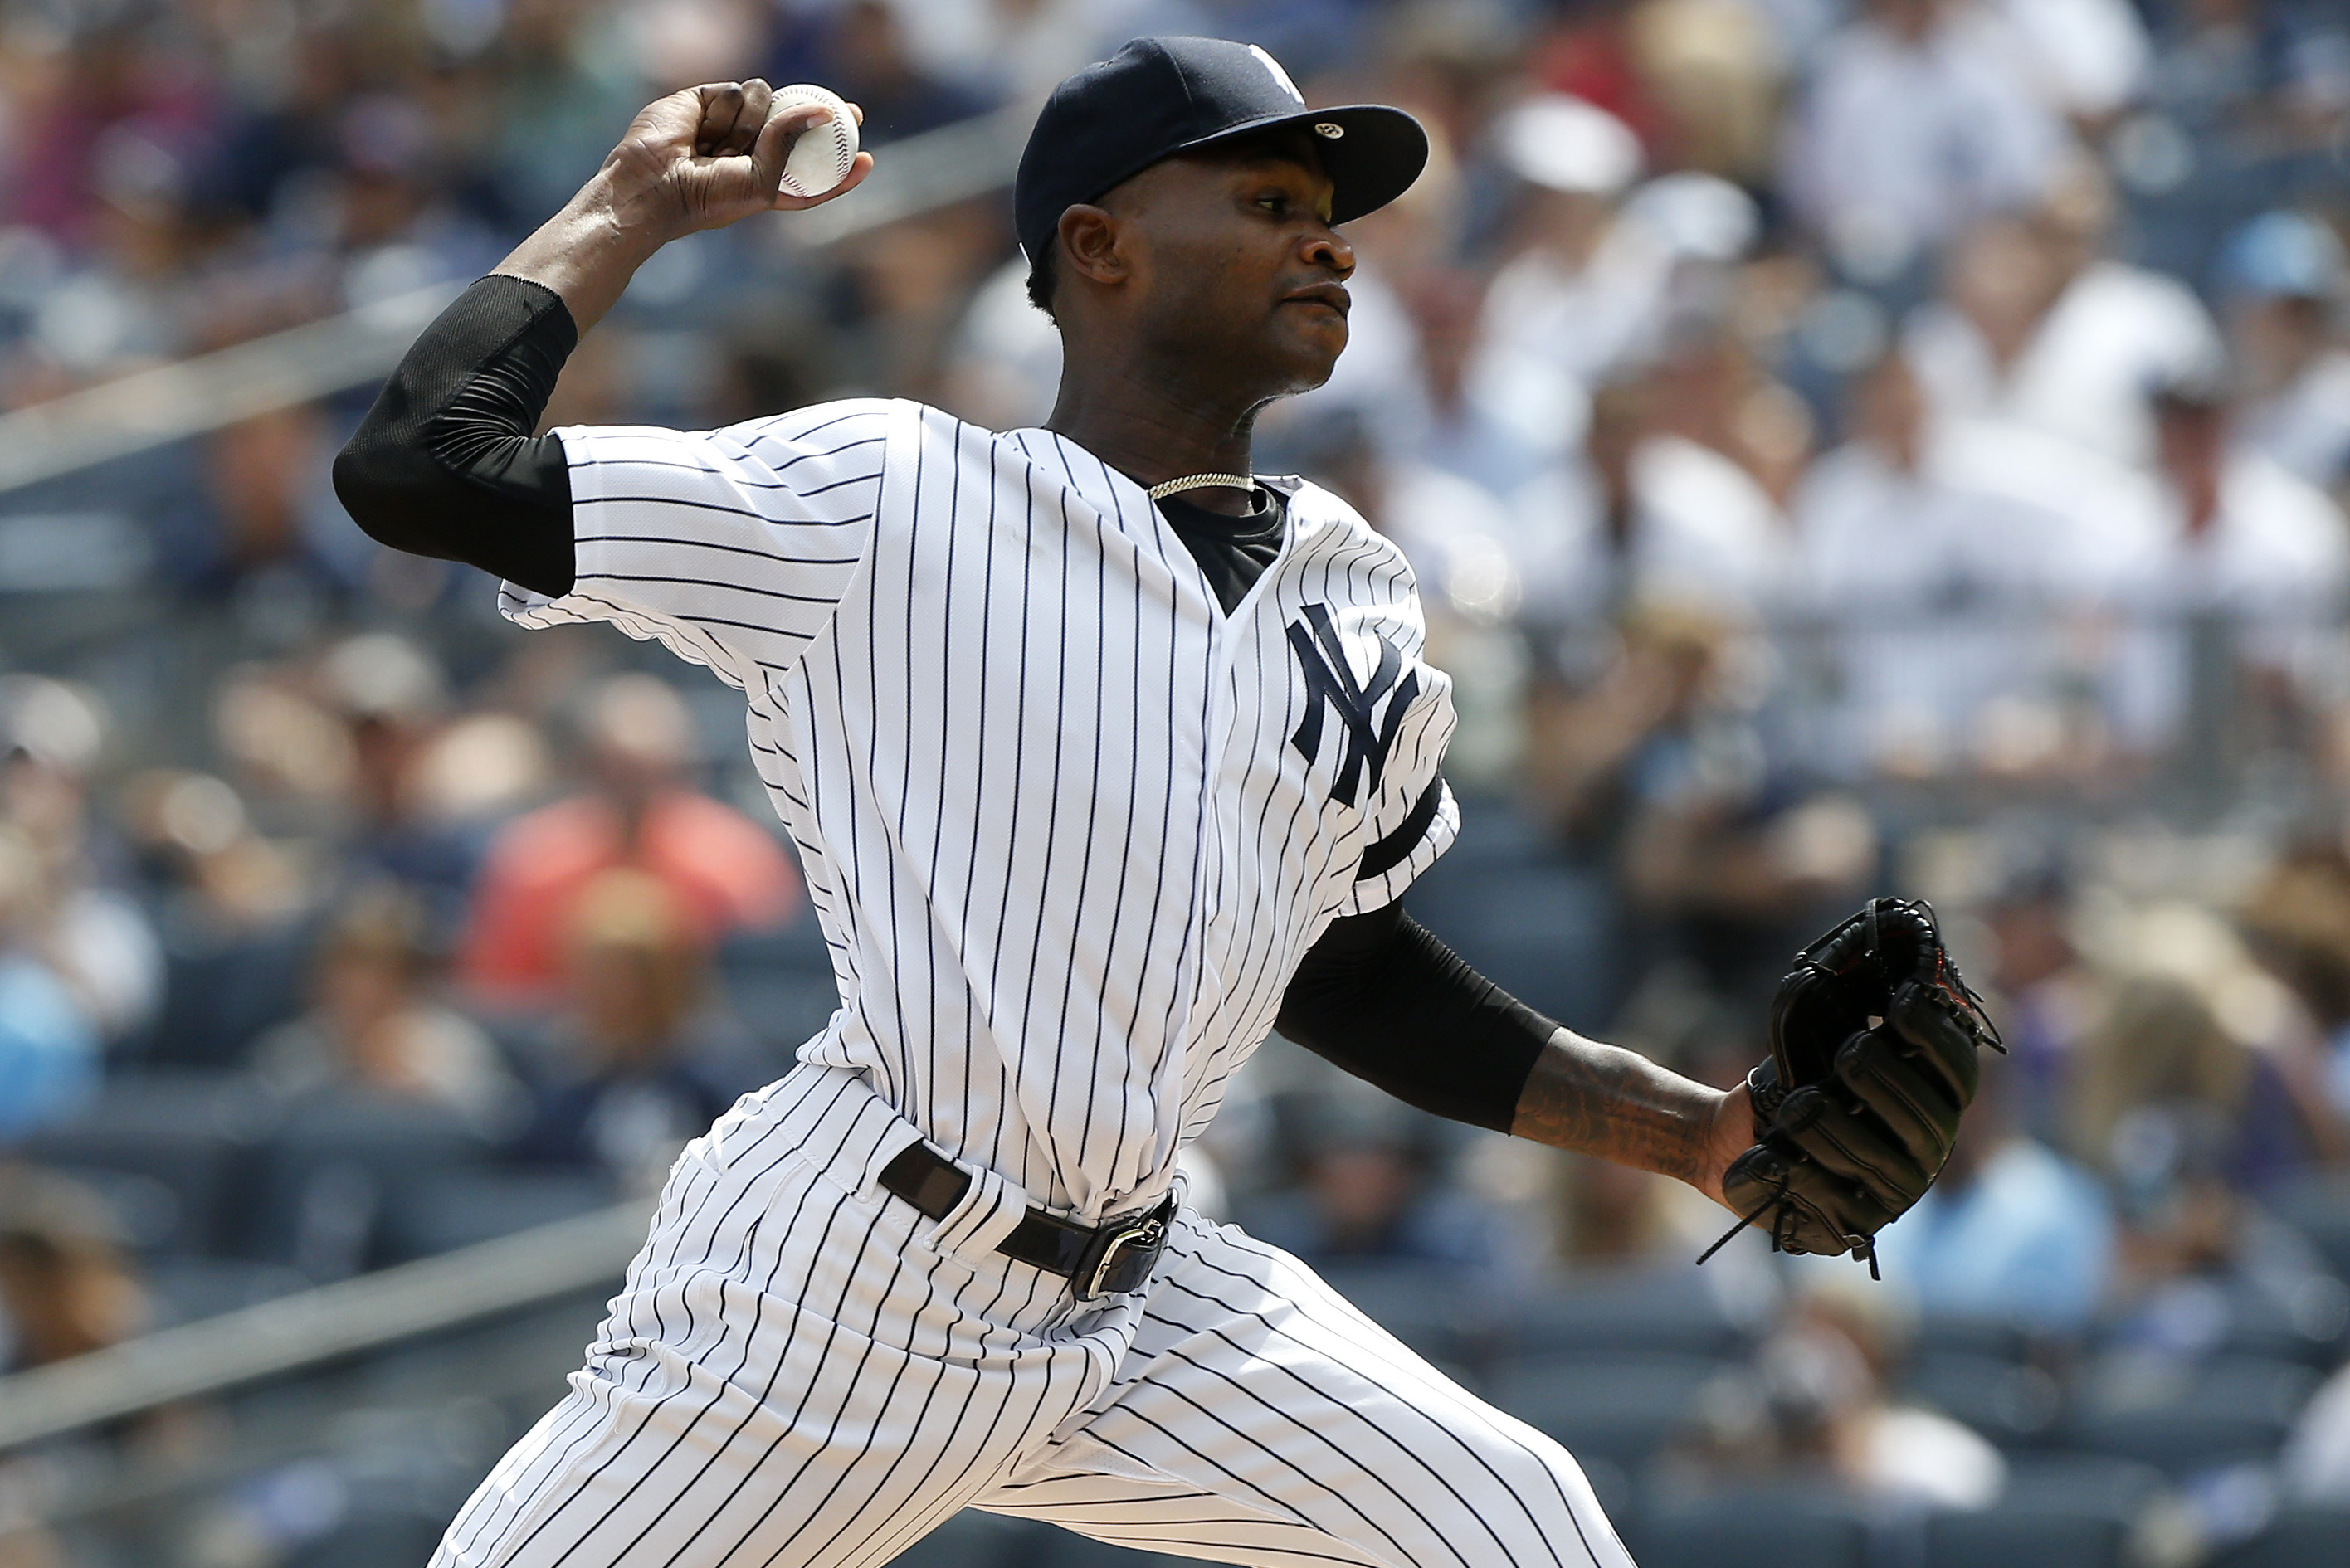 Yankees' Domingo German Suspended 81 Games for Violating DV Policy